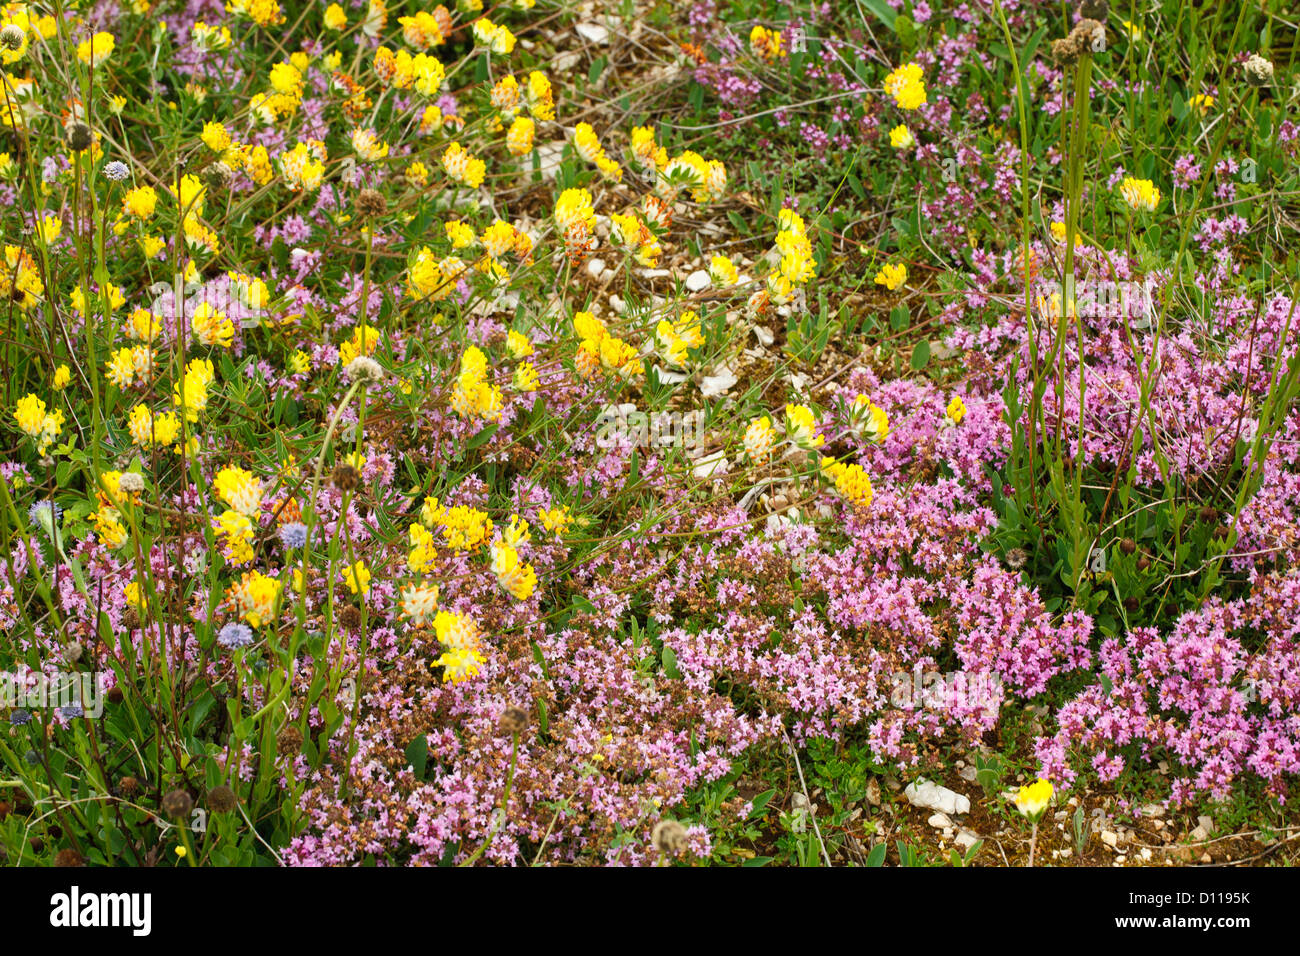 Wildflowers including Kidney Vetch (Anthyllis vulneraria) and Thyme (Thymus sp.) on the Causse de Gramat, Lot region, France. Stock Photo